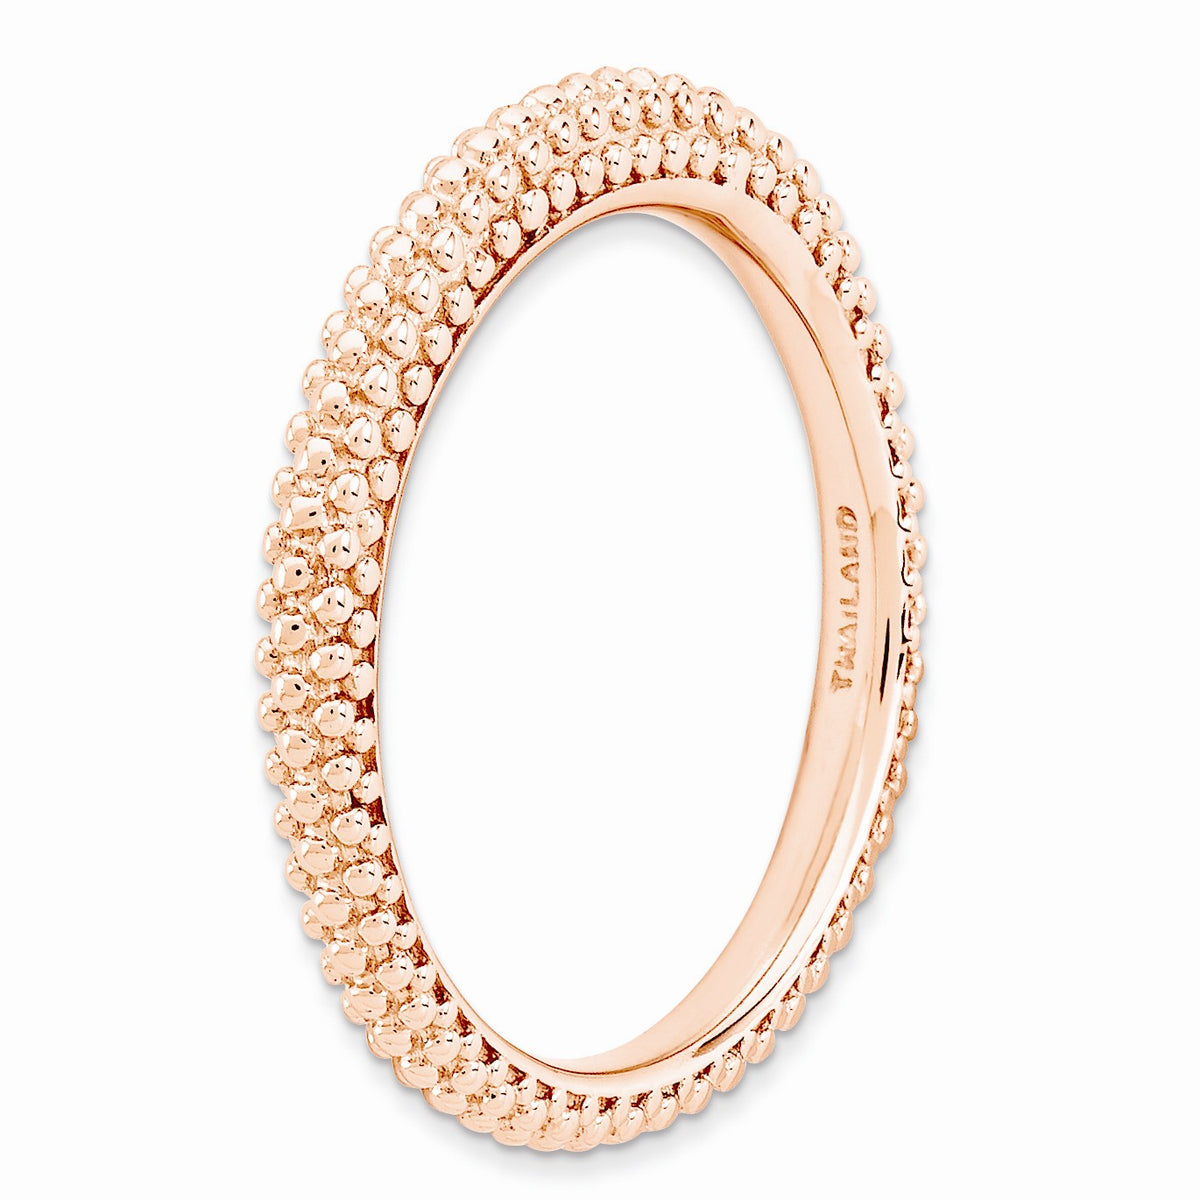 Alternate view of the Stackable 14K Rose Gold Plated Silver Domed Milgrain Band by The Black Bow Jewelry Co.